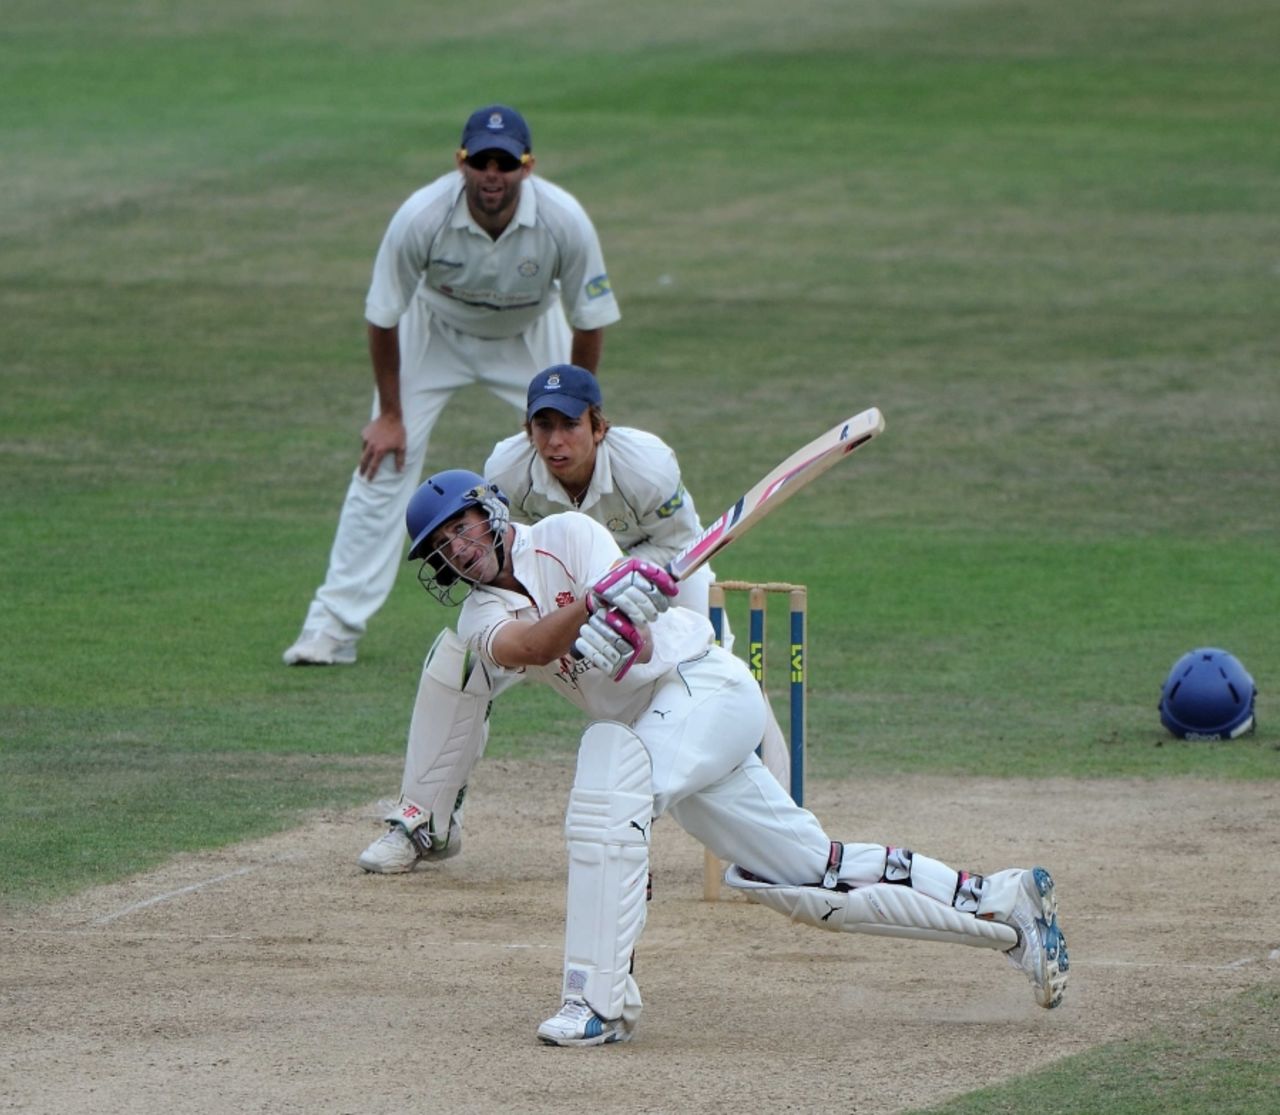 Gareth Cross reached his hundred late on the fourth afternoon as the match ended in a draw, Hampshire v Lancashire, County Championship Division One, Rose Bowl, August 1 2010